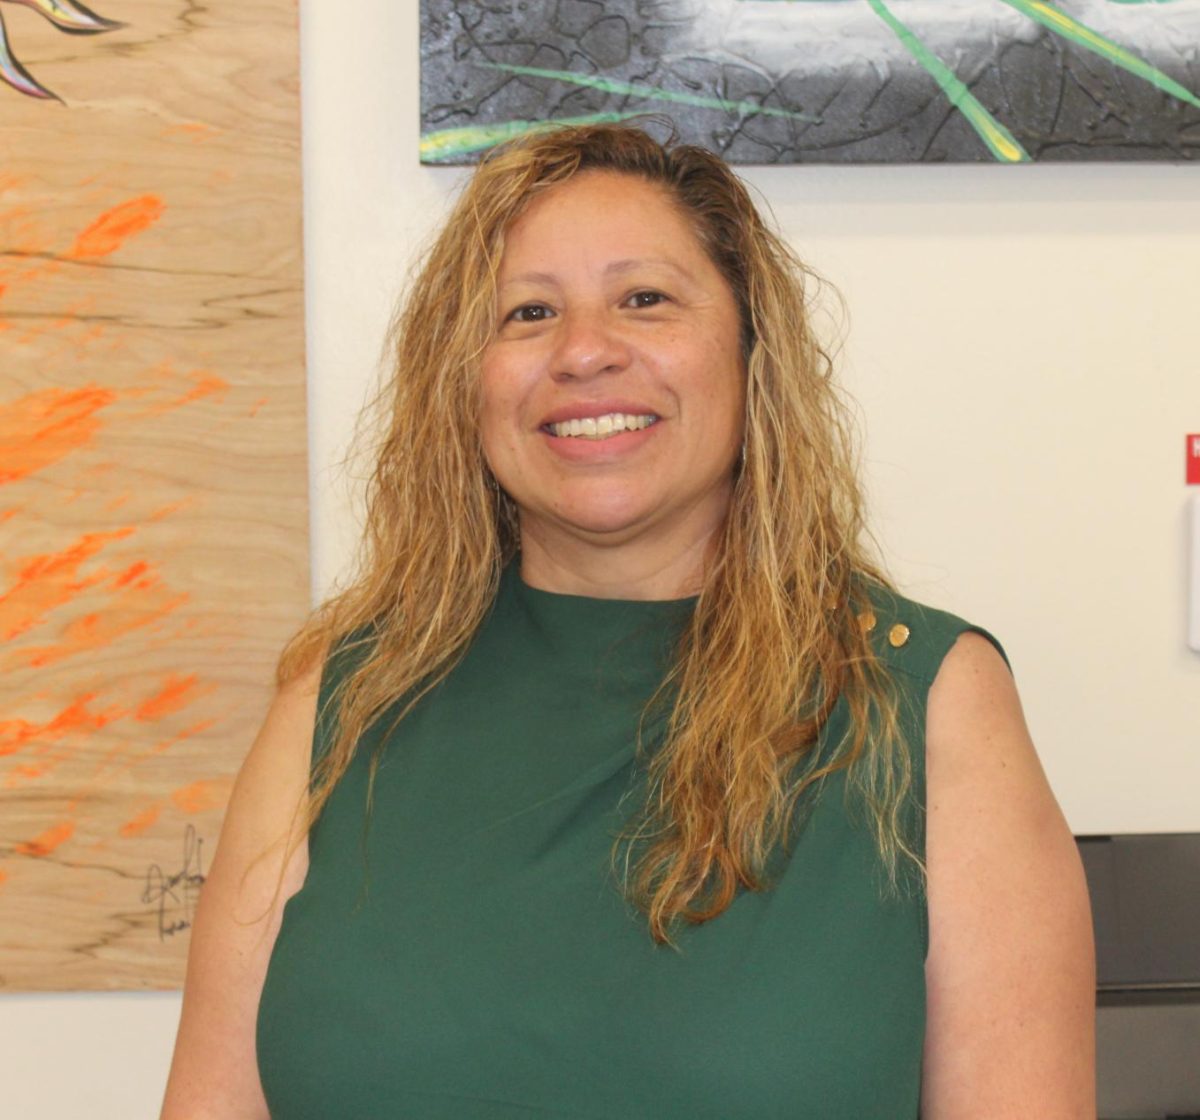 Christina Perez is only the second female principal in school history. “Being someone who came from this school and this community, thats a real sense of pride,“ Perez said.